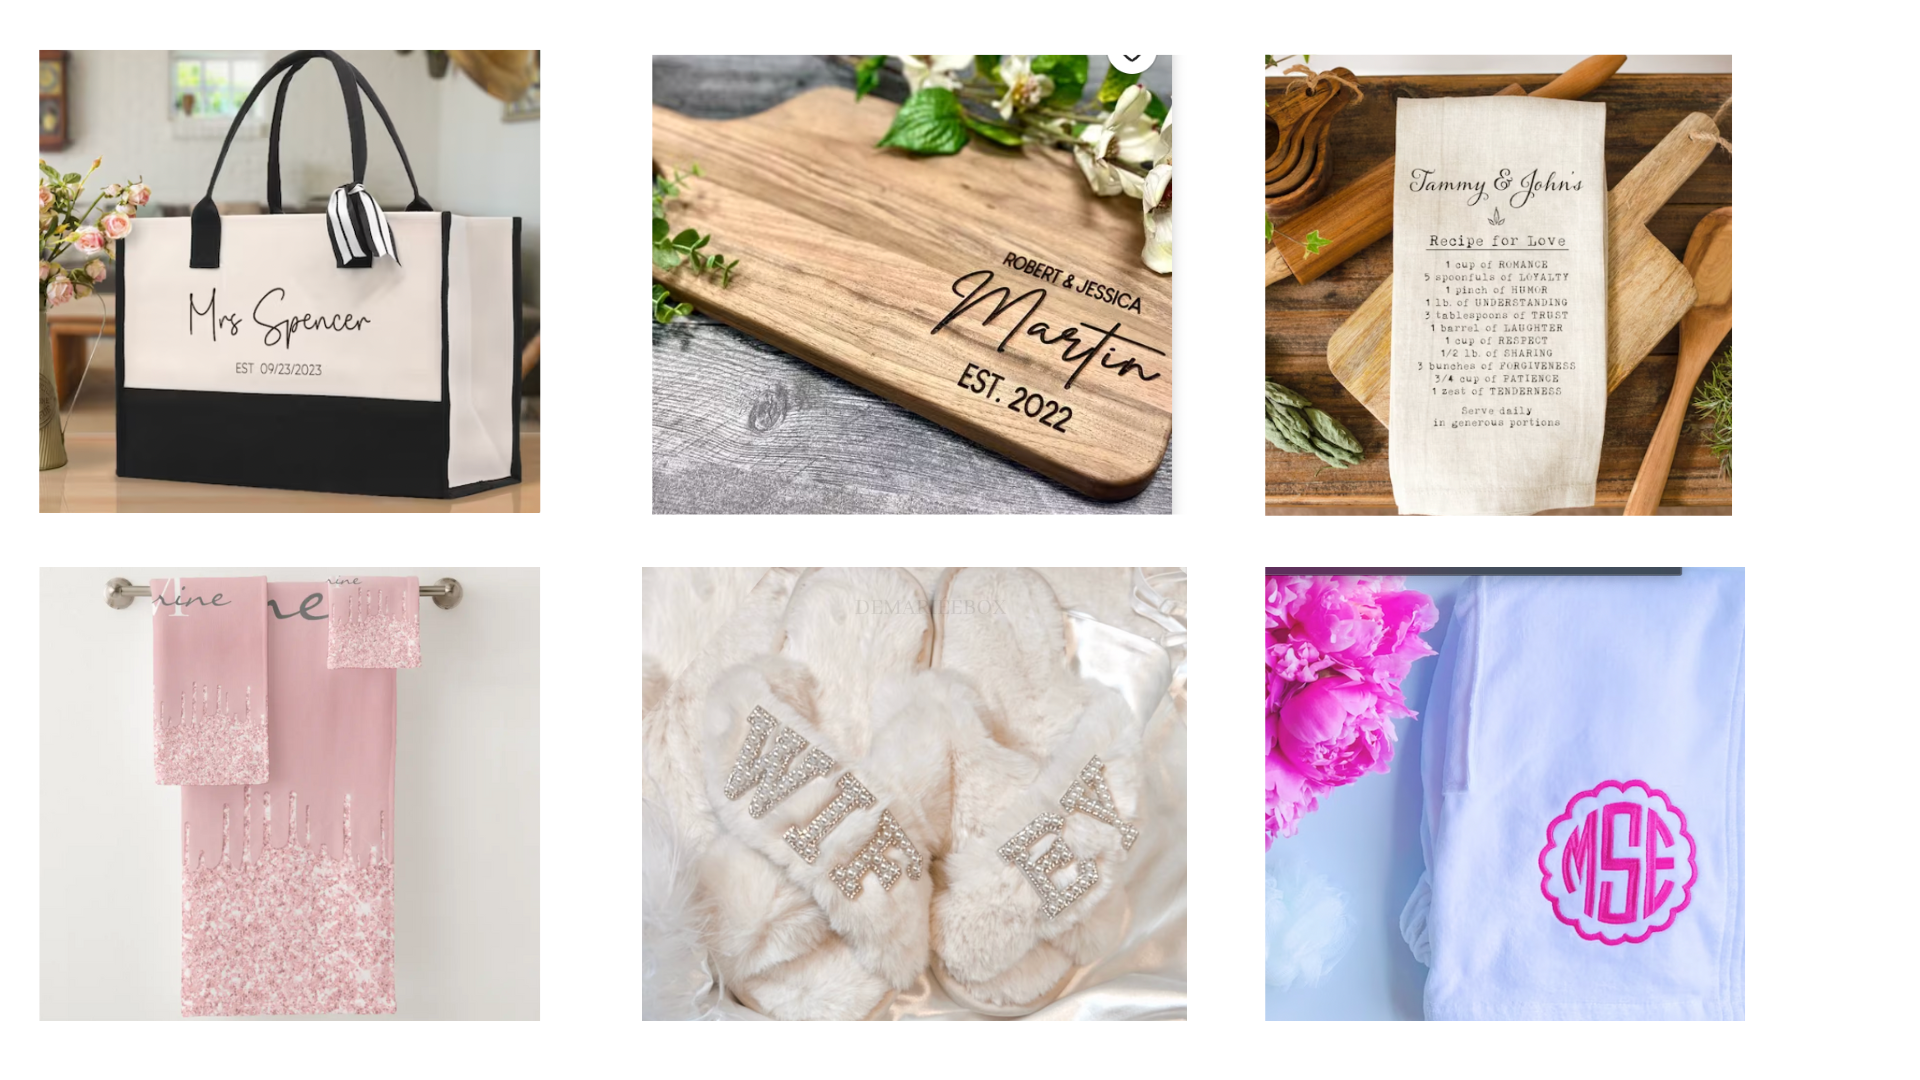 15 Awesome Bridal Shower Gift Ideas that She'll Absolutely Adore -   Blog